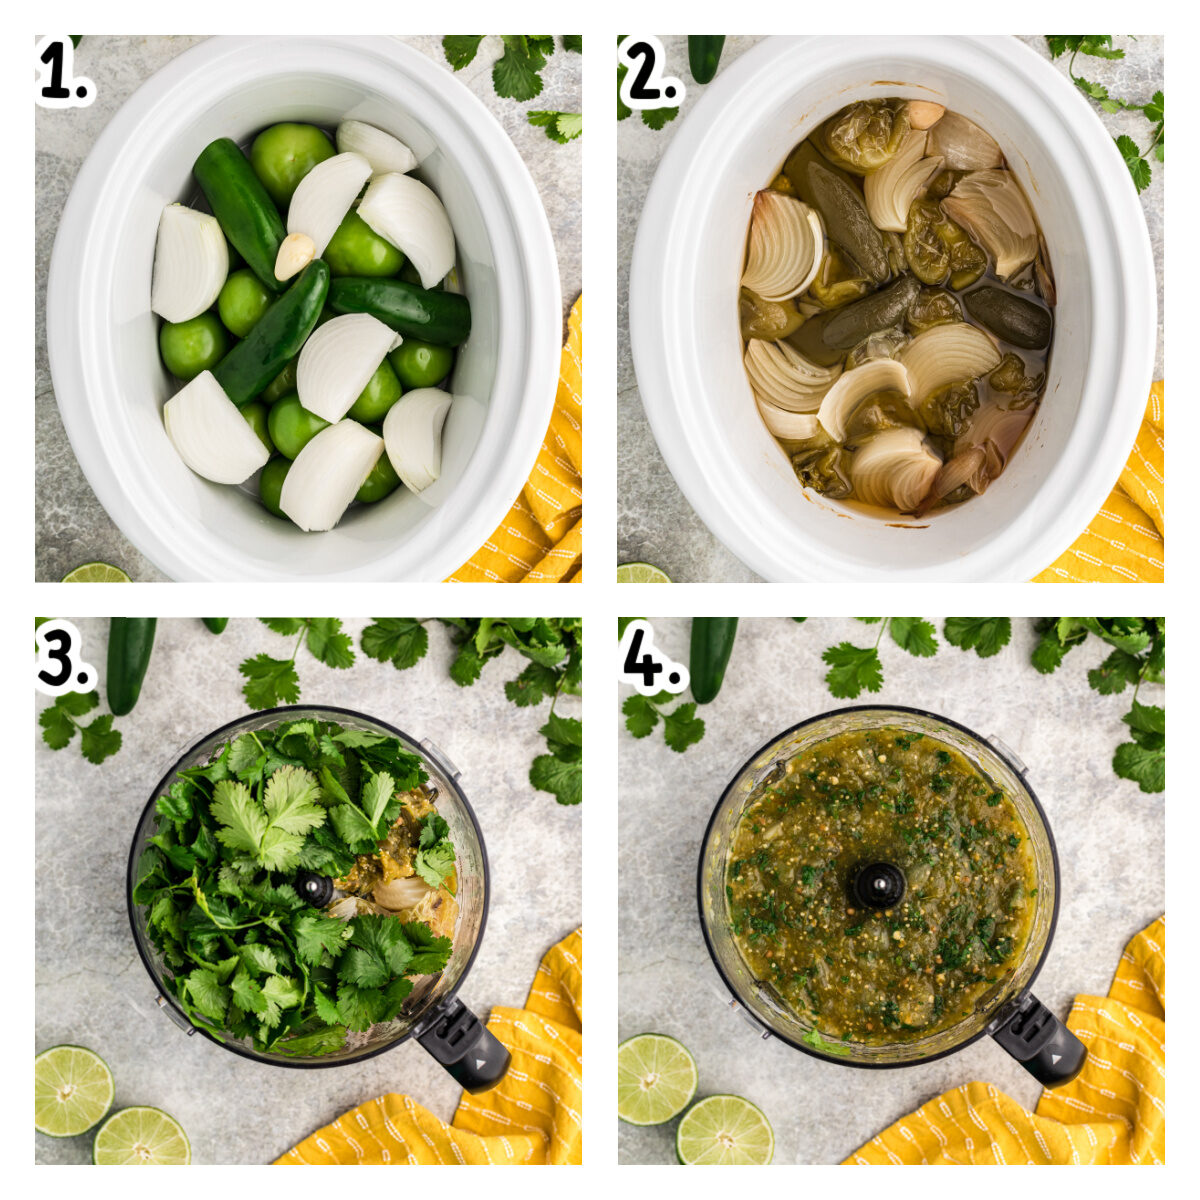 Four images showing how to make tomatillo salsa in a crockpot and then blend it.